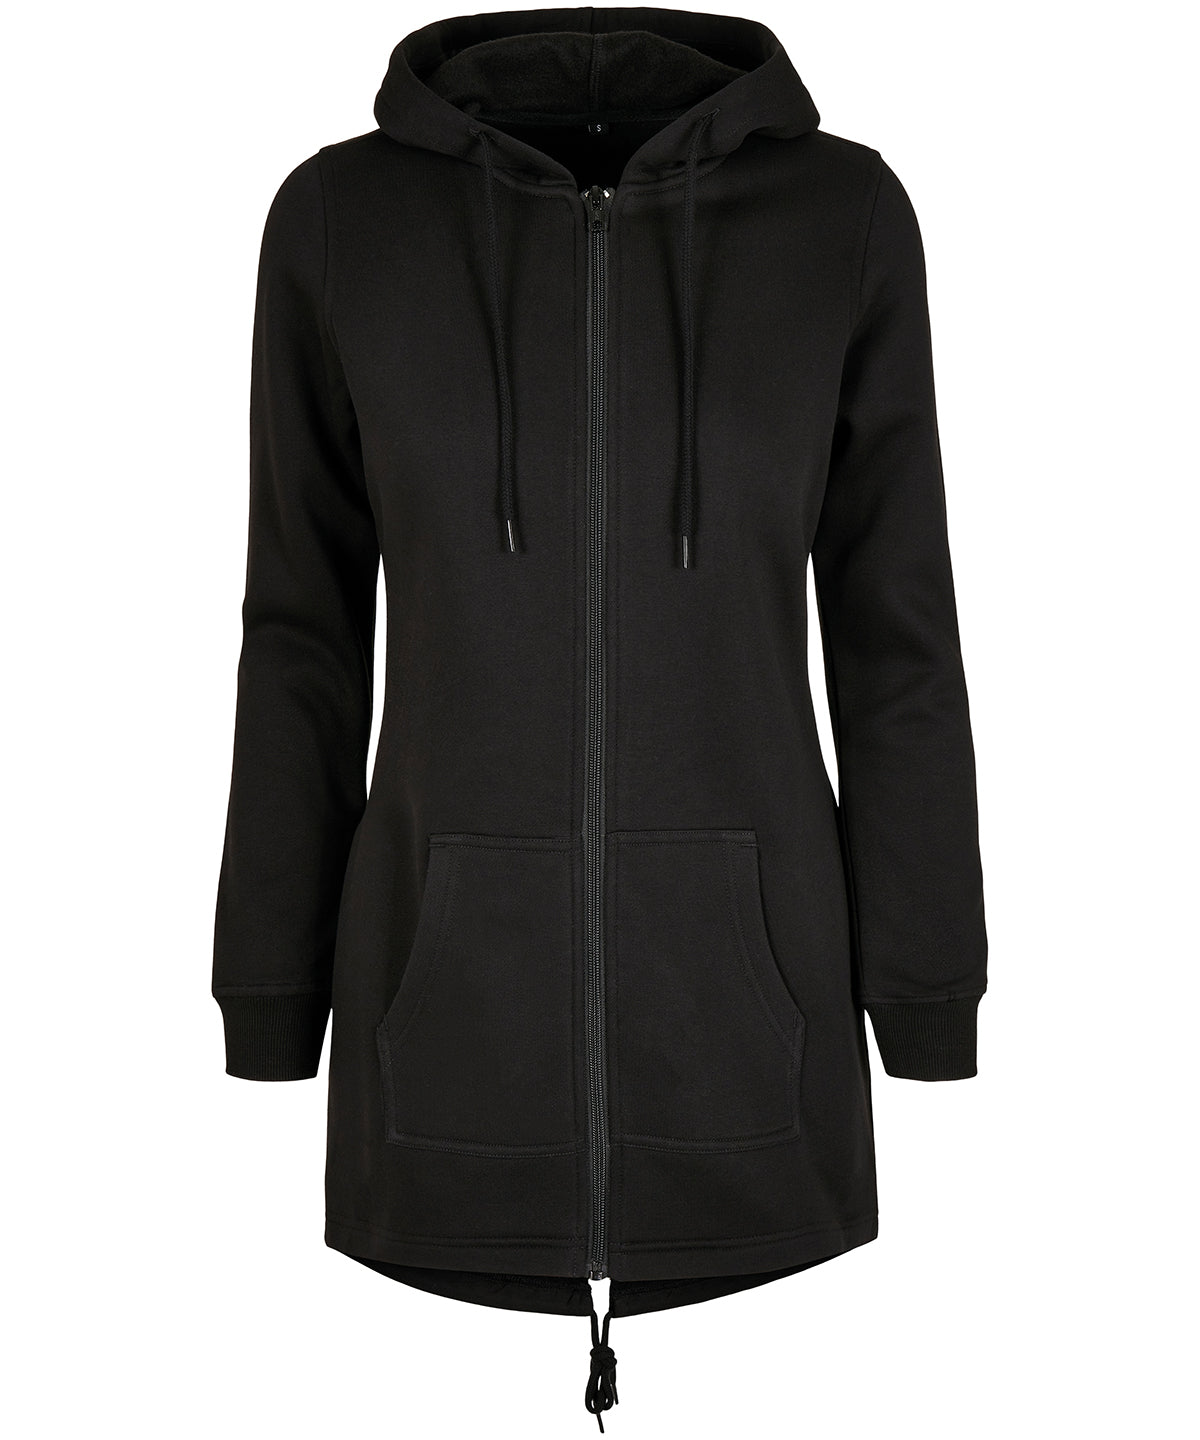 Personalised Jackets - Black Build Your Brand Women's sweat parka